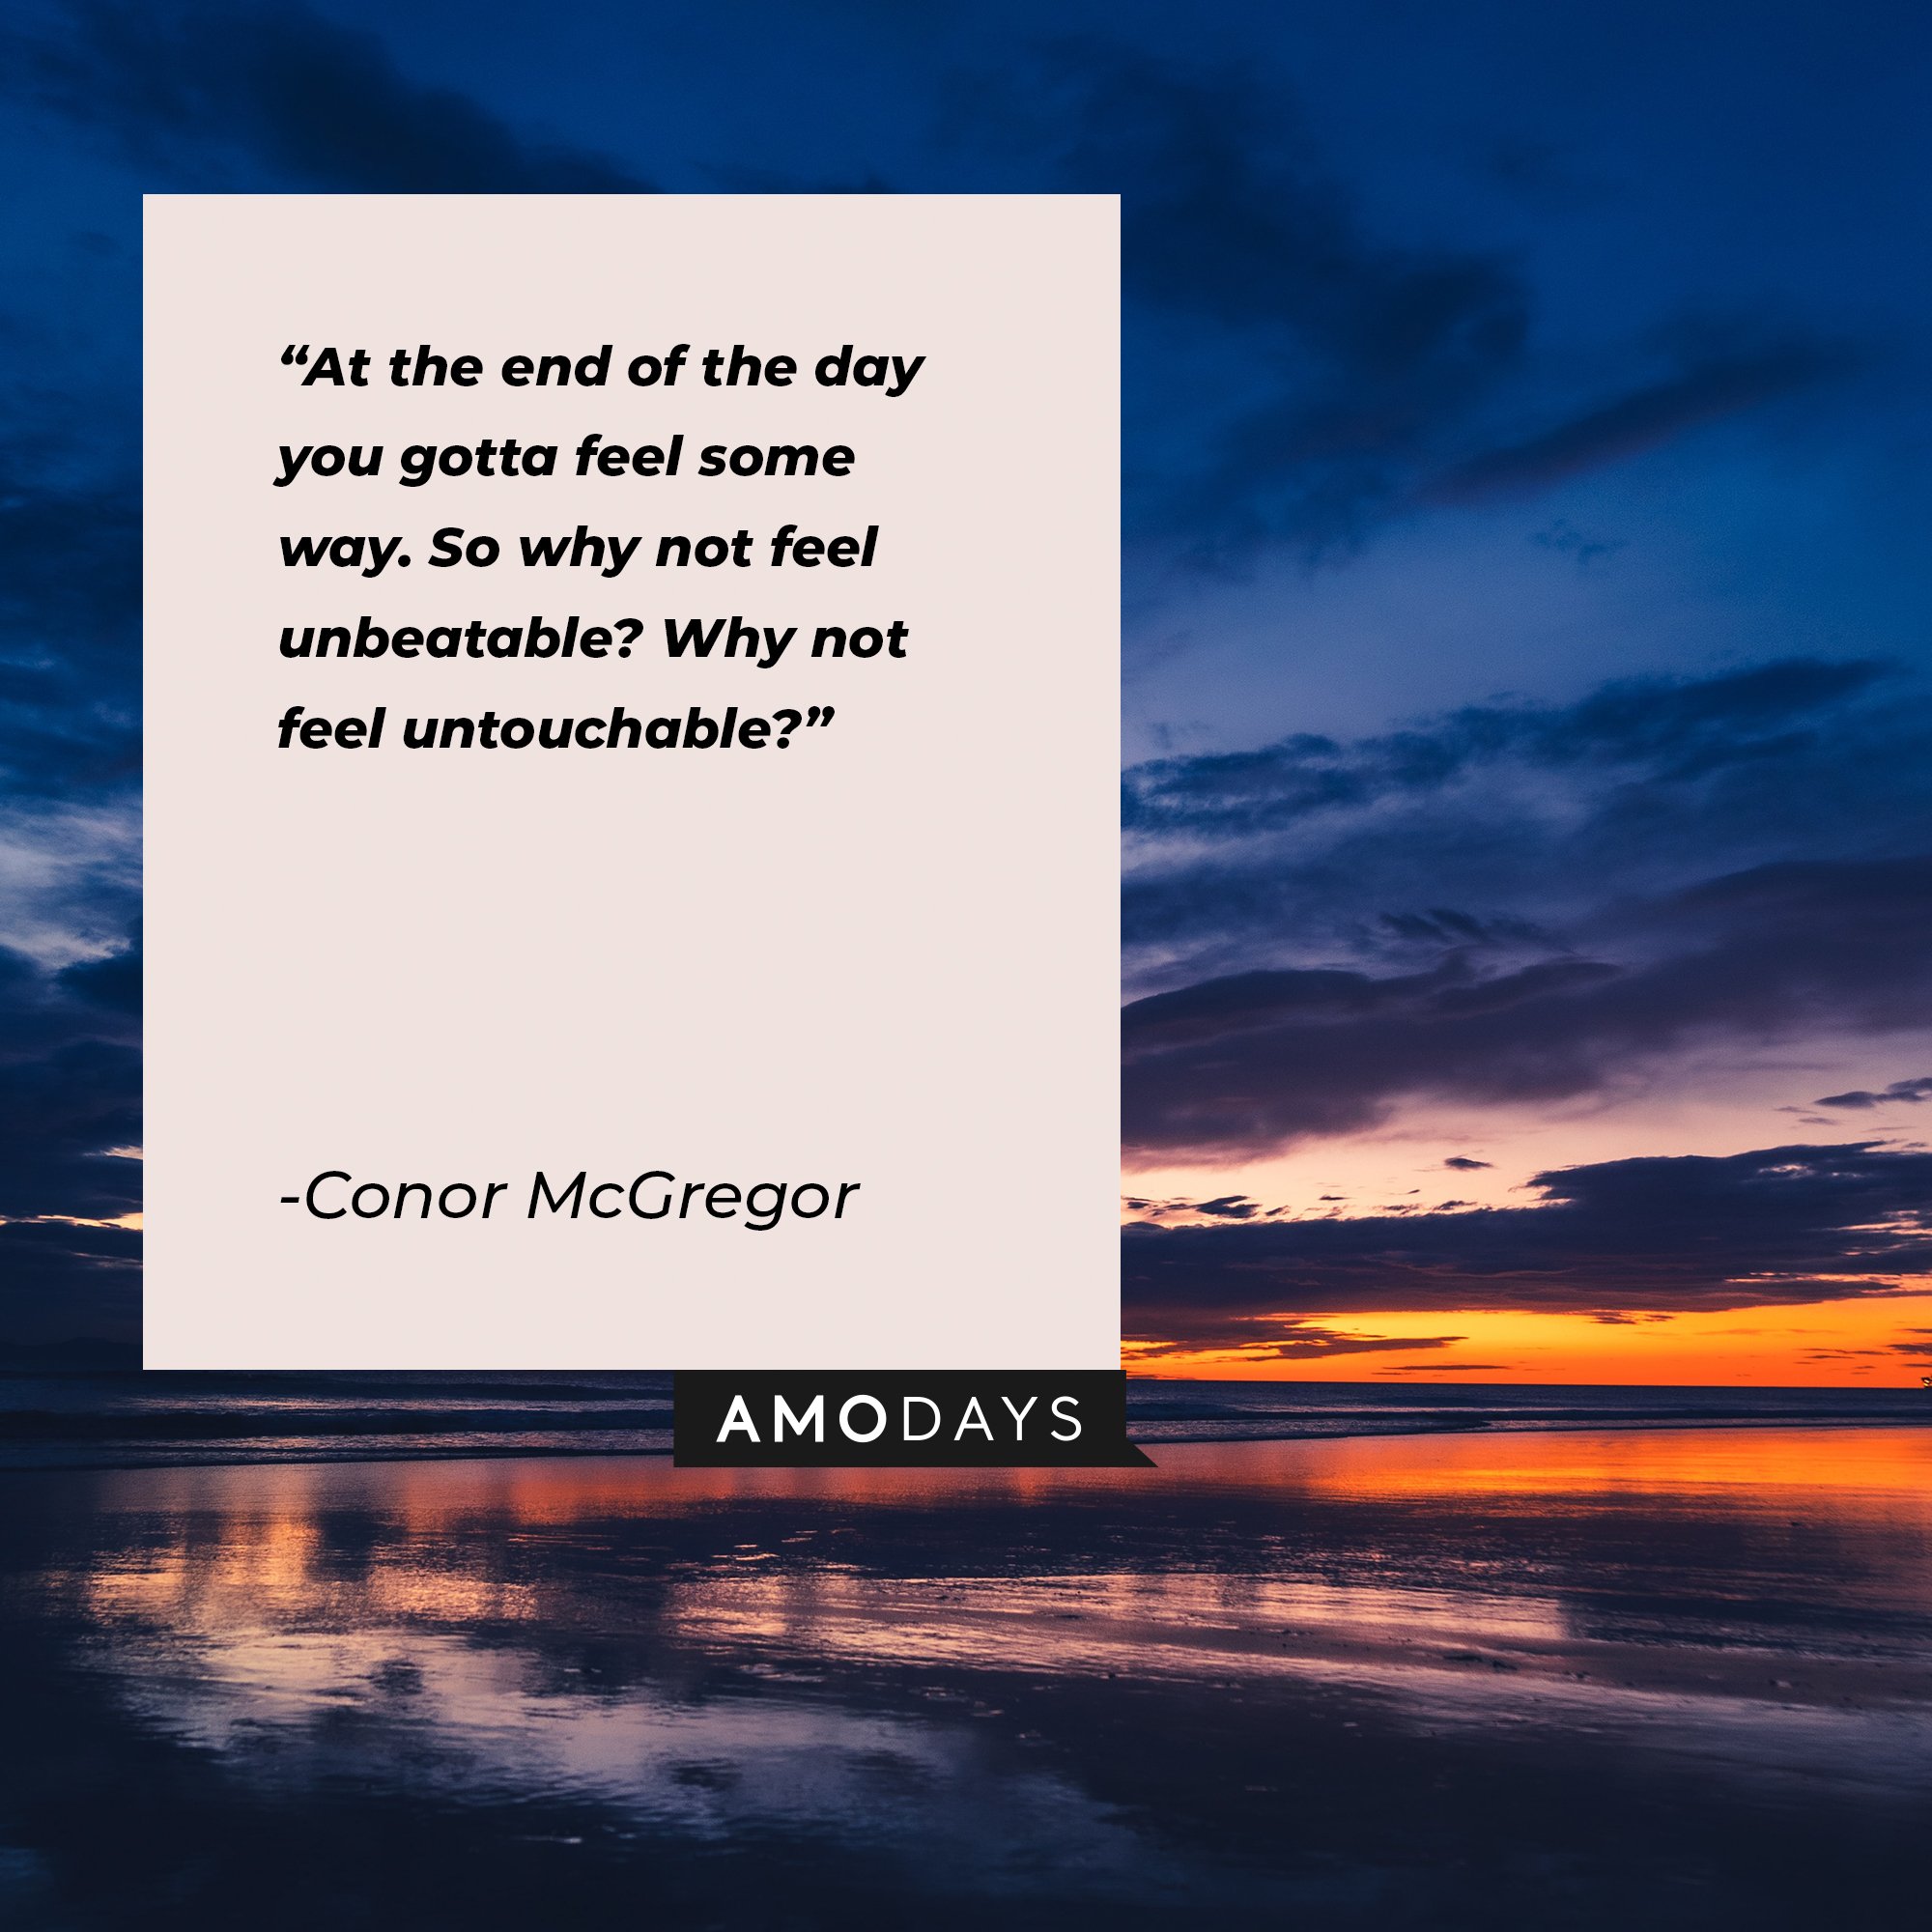 Conor McGregor’s quote: "At the end of the day, you gotta feel some way. So why not feel unbeatable? Why not feel untouchable" | Image: AmoDays    